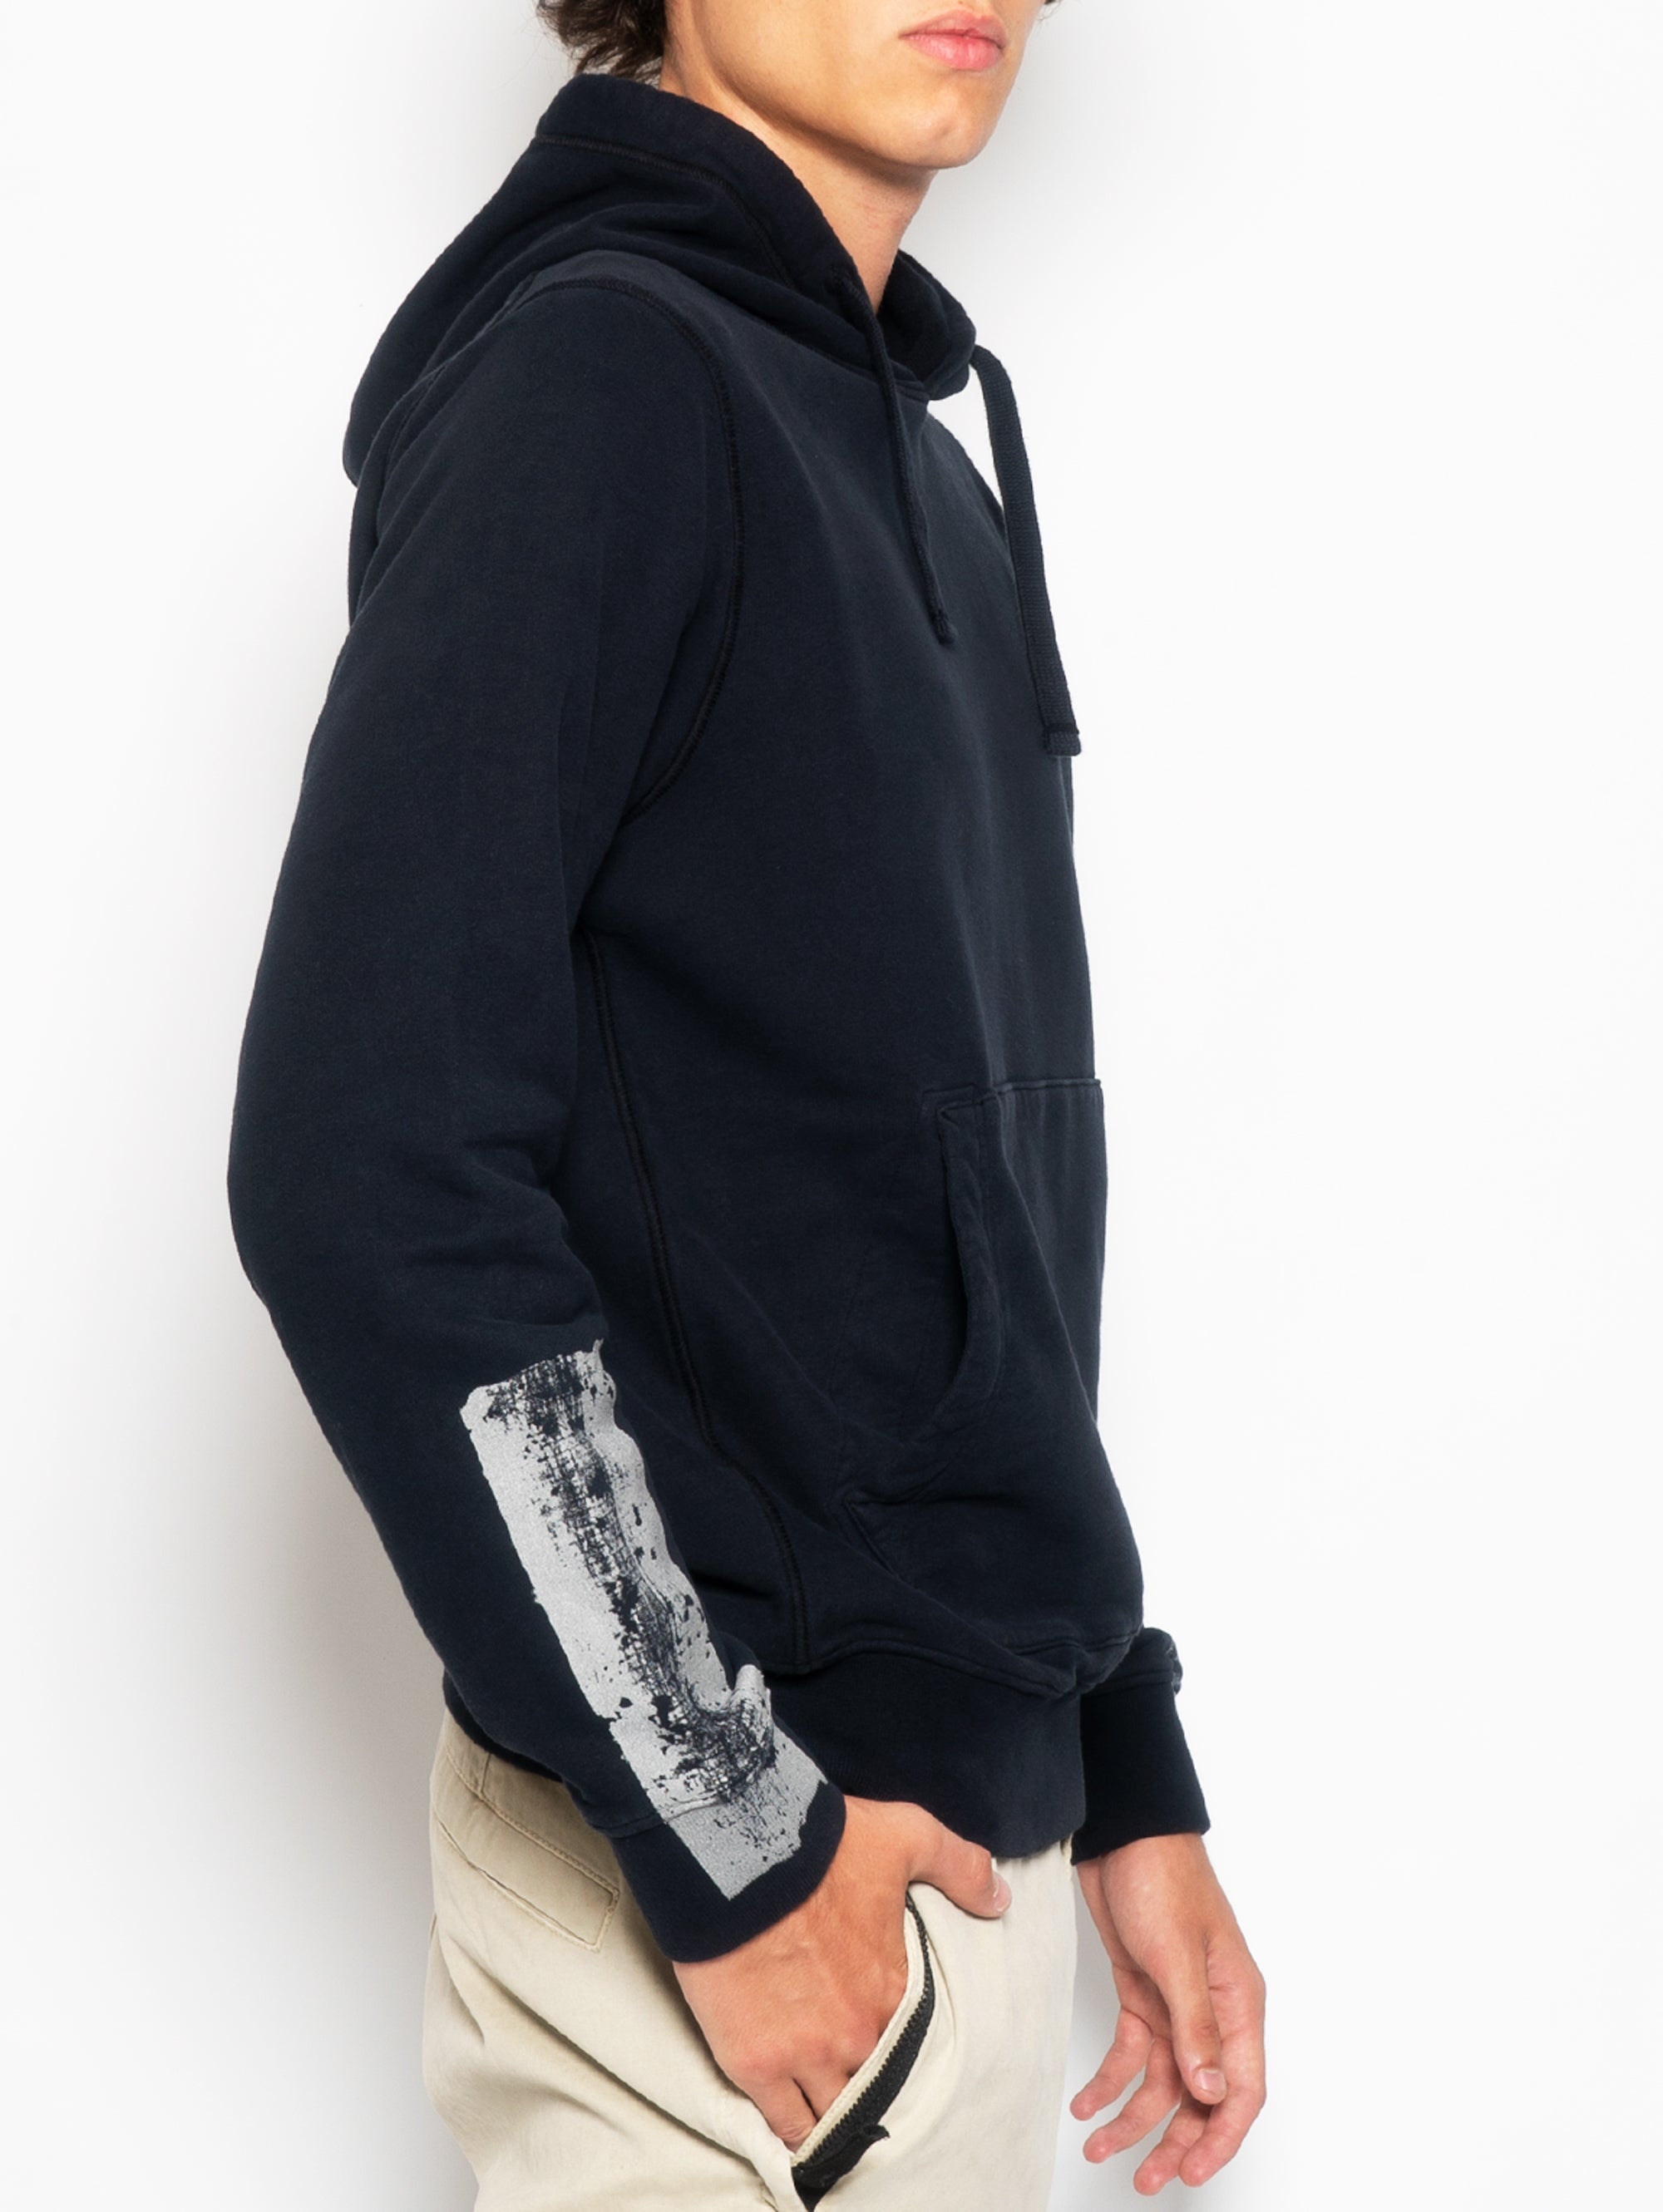 Hooded Sweatshirt with Reflective Blue Details